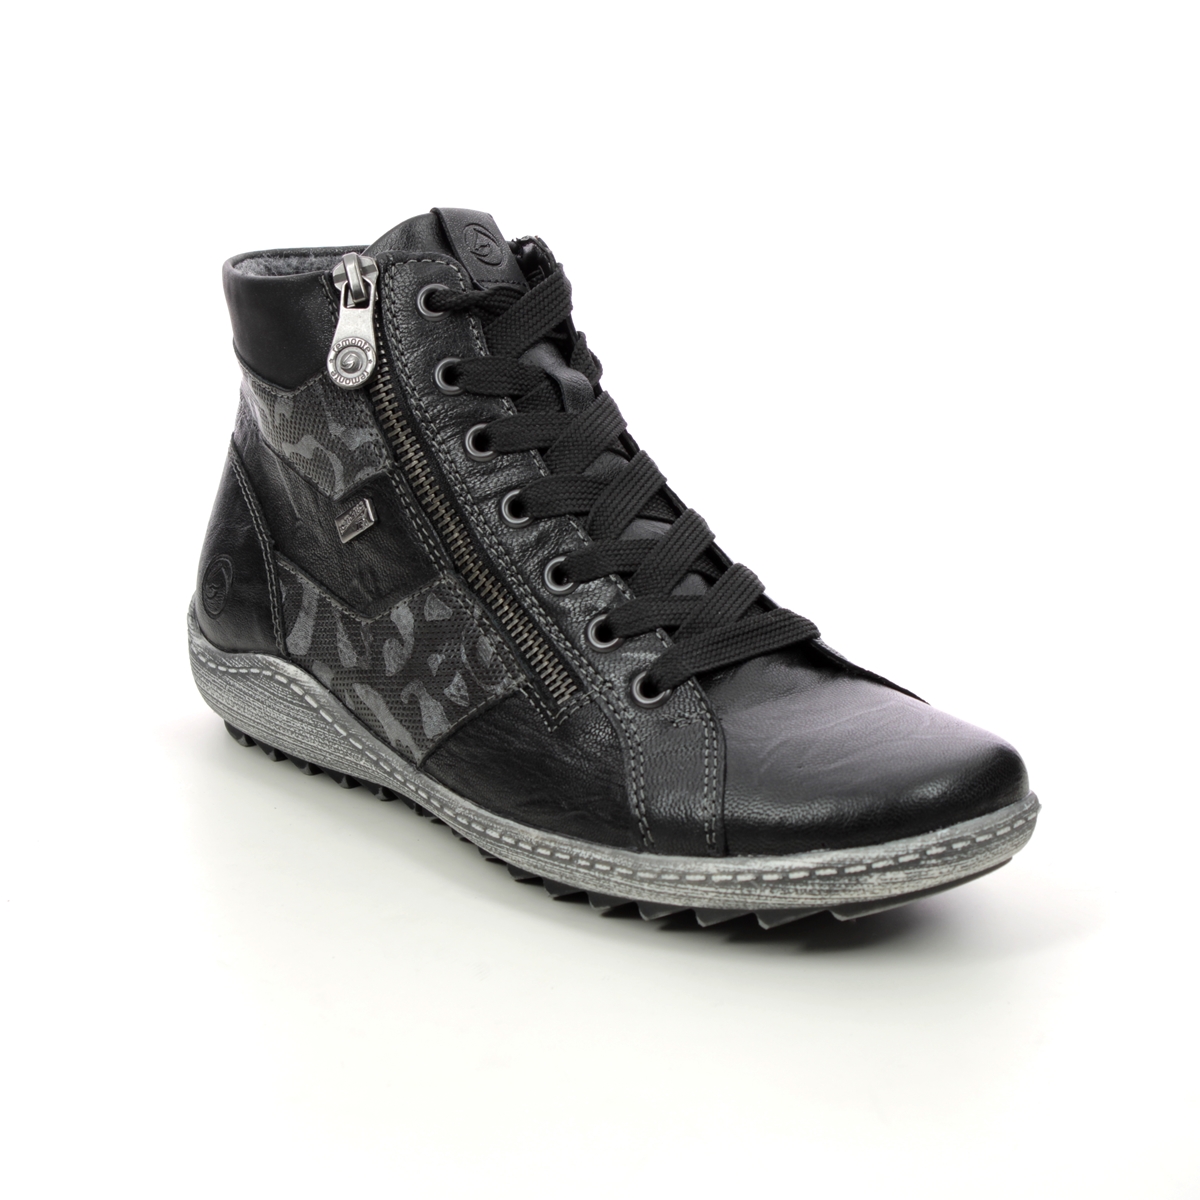 Remonte Ziginzips Tex Black Leather Womens Hi Tops R1484-02 In Size 40 In Plain Black Leather